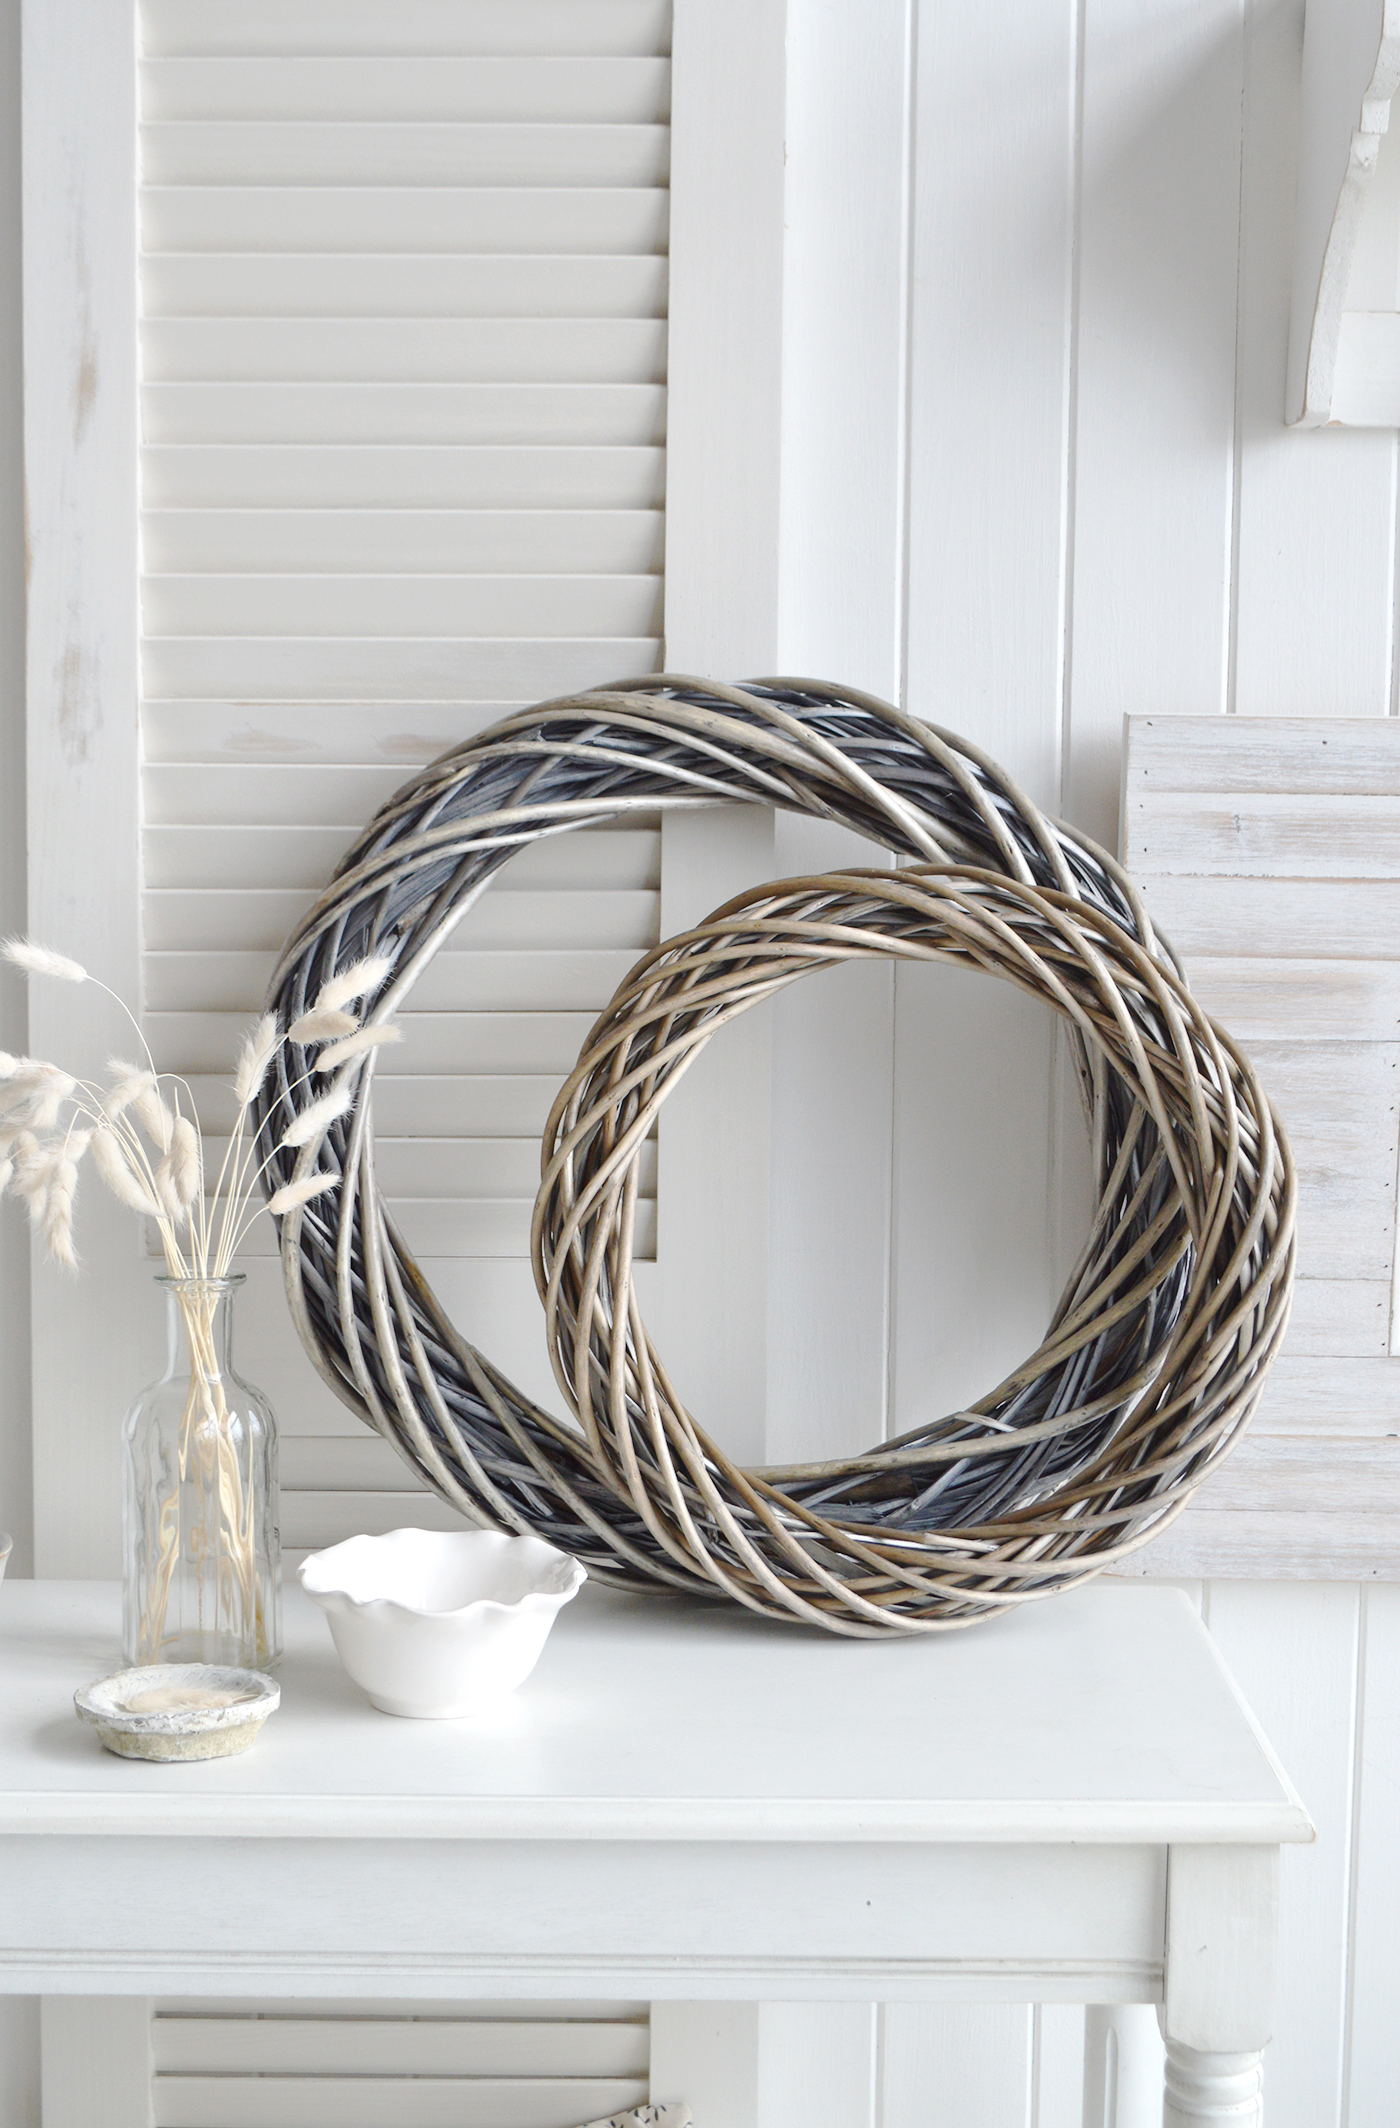 Grey Willow Wreath for a traditional New England look to your room from The White Lighthouse Furniture for the hallway, living room, bedroom and bathroom. Country, coastal and farmhouse home decor